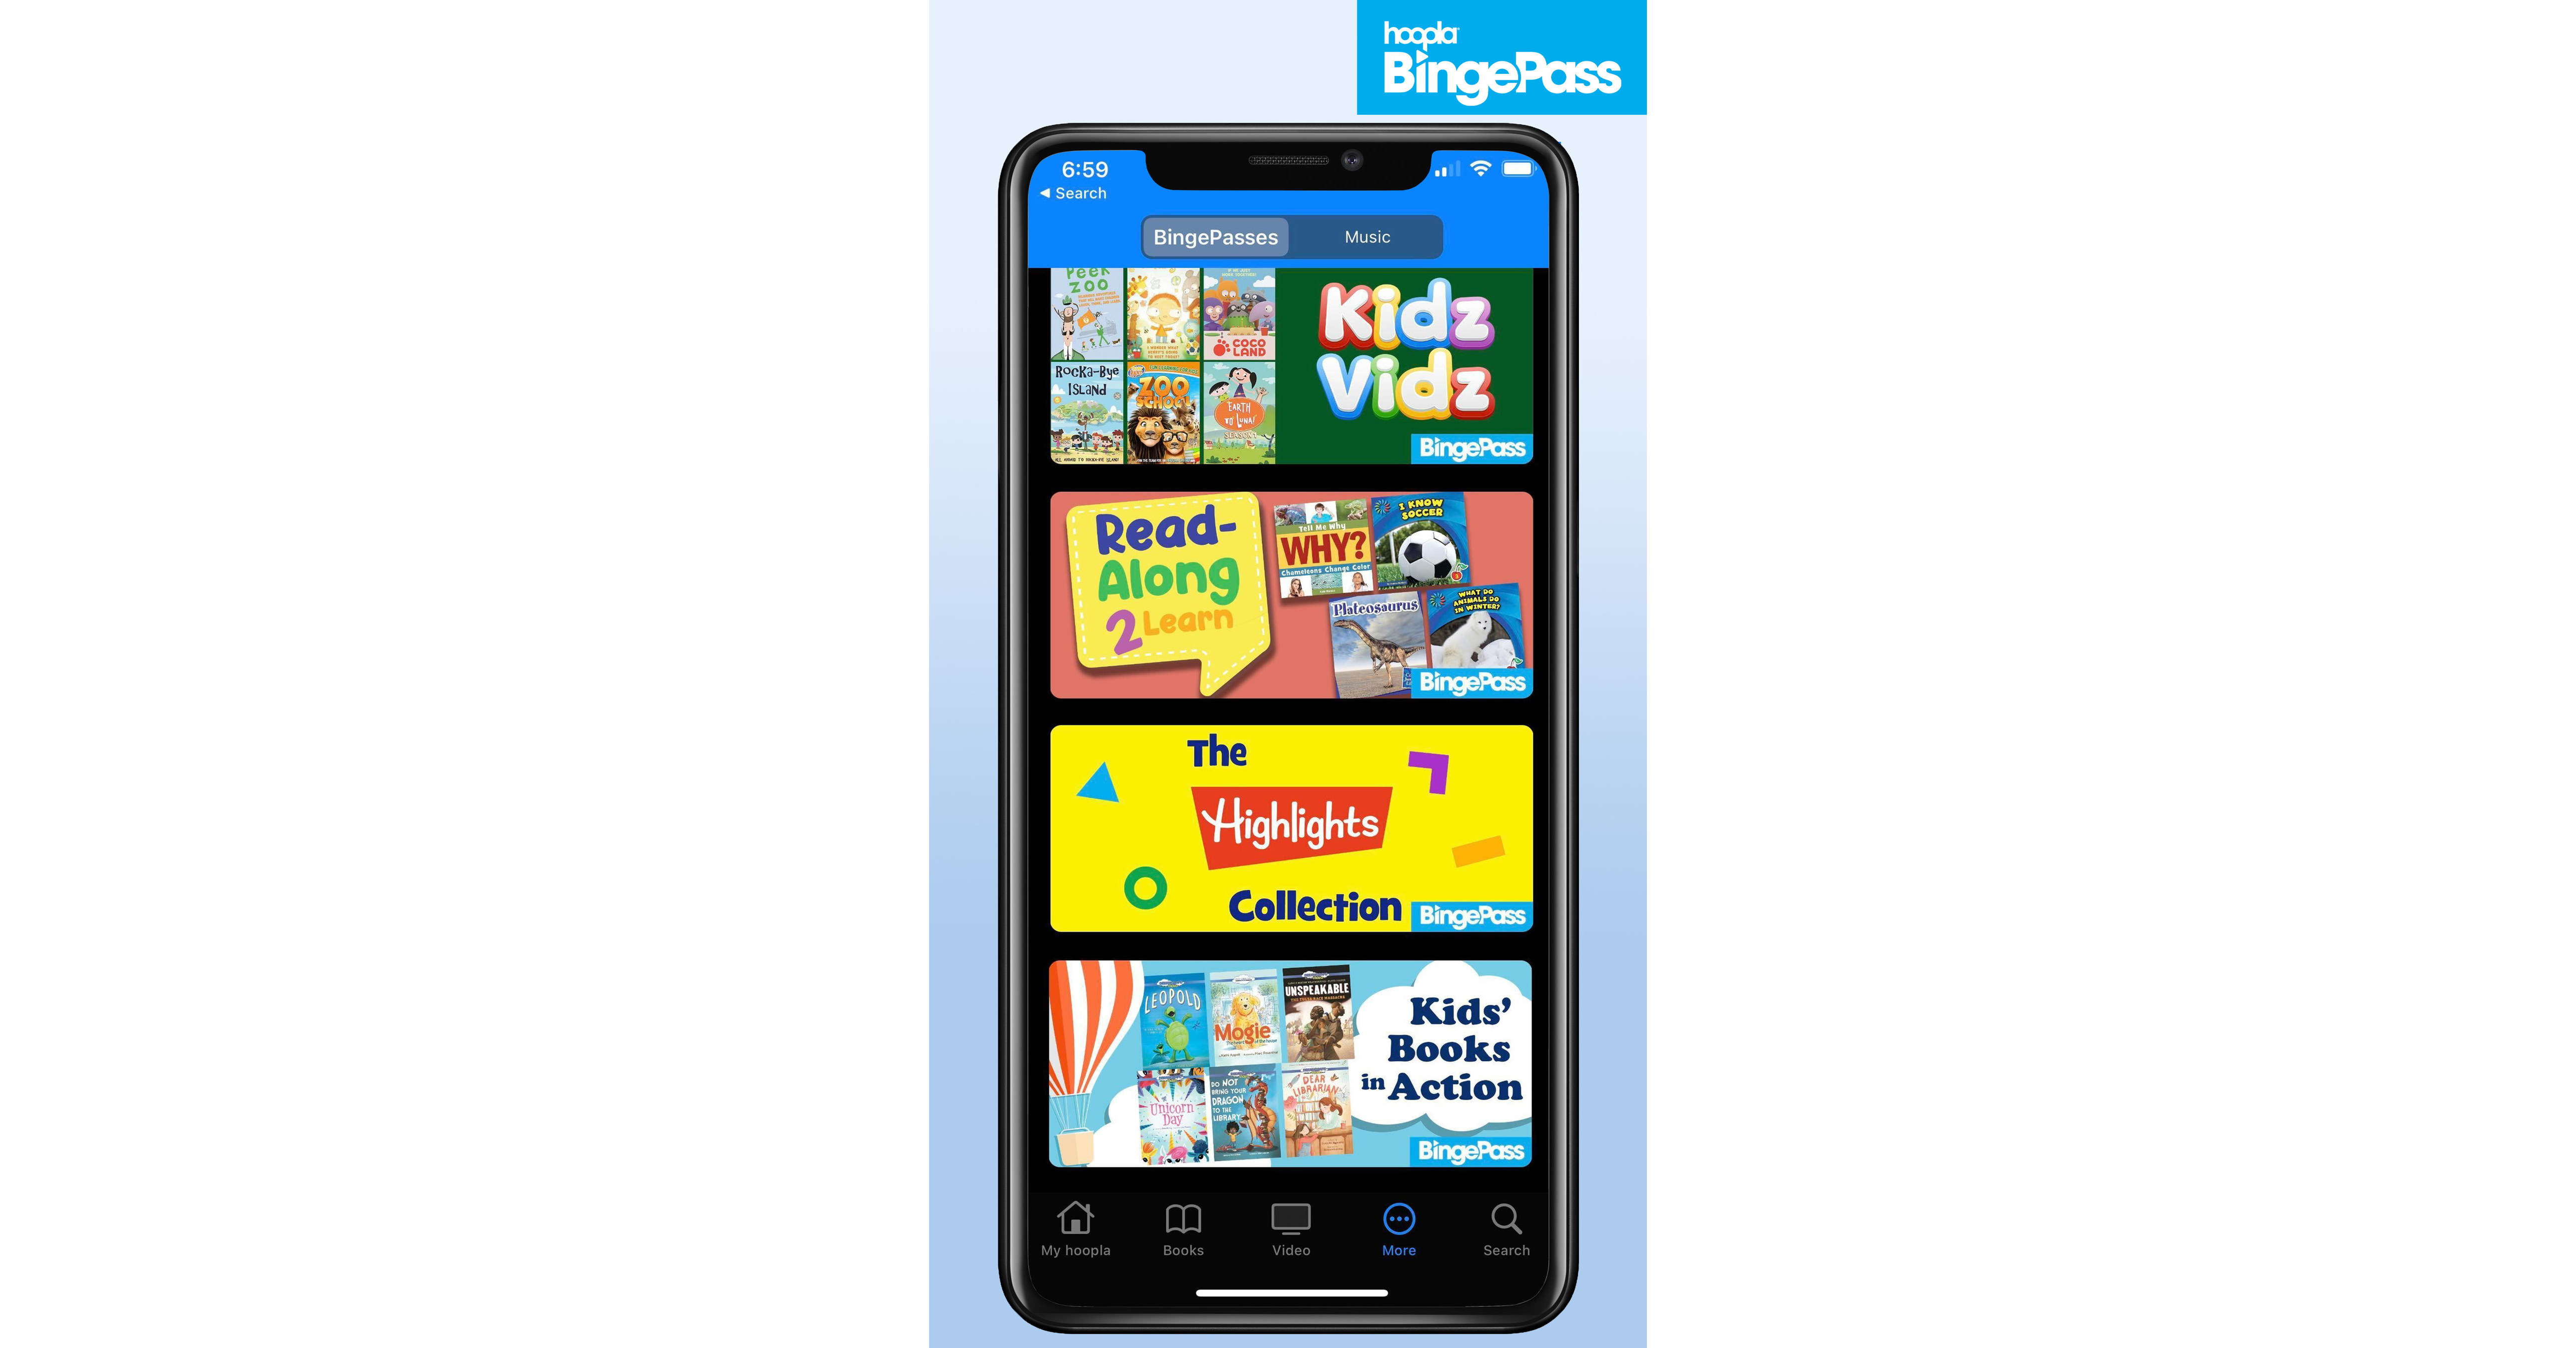   
																hoopla digital Expands BingePass Offering with New Children's Collections 
															 